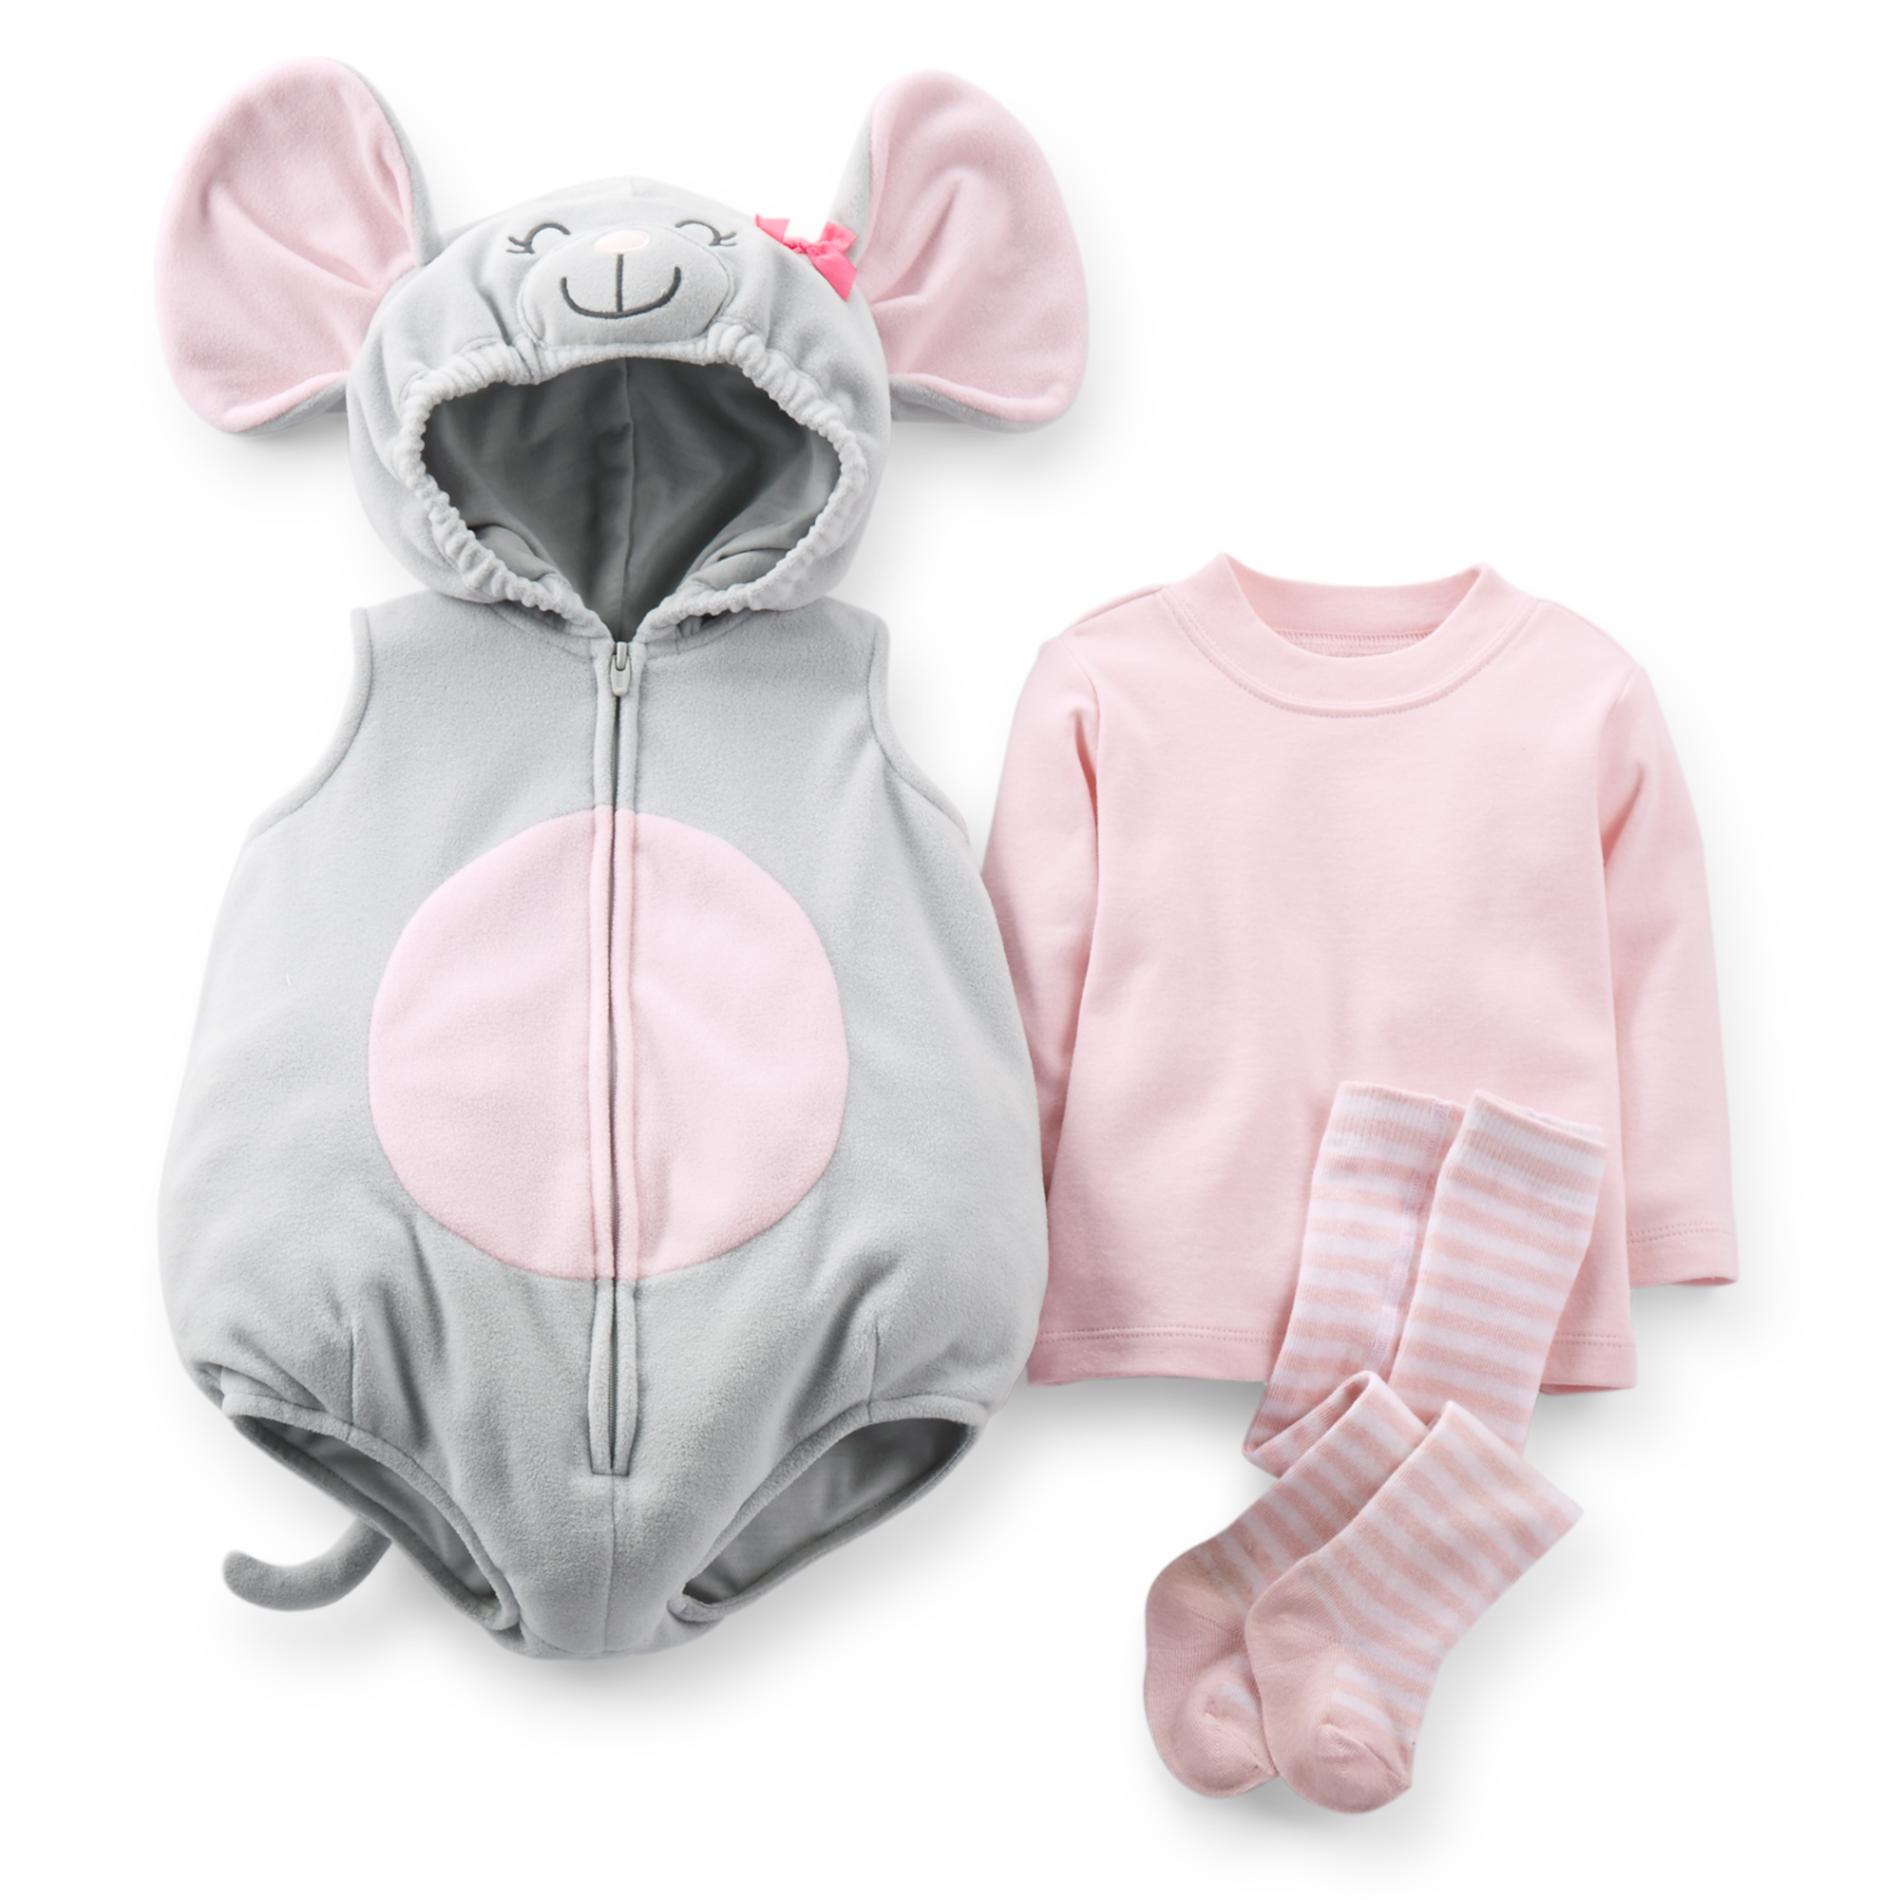 Carter's Infant Girl's Mouse Costume